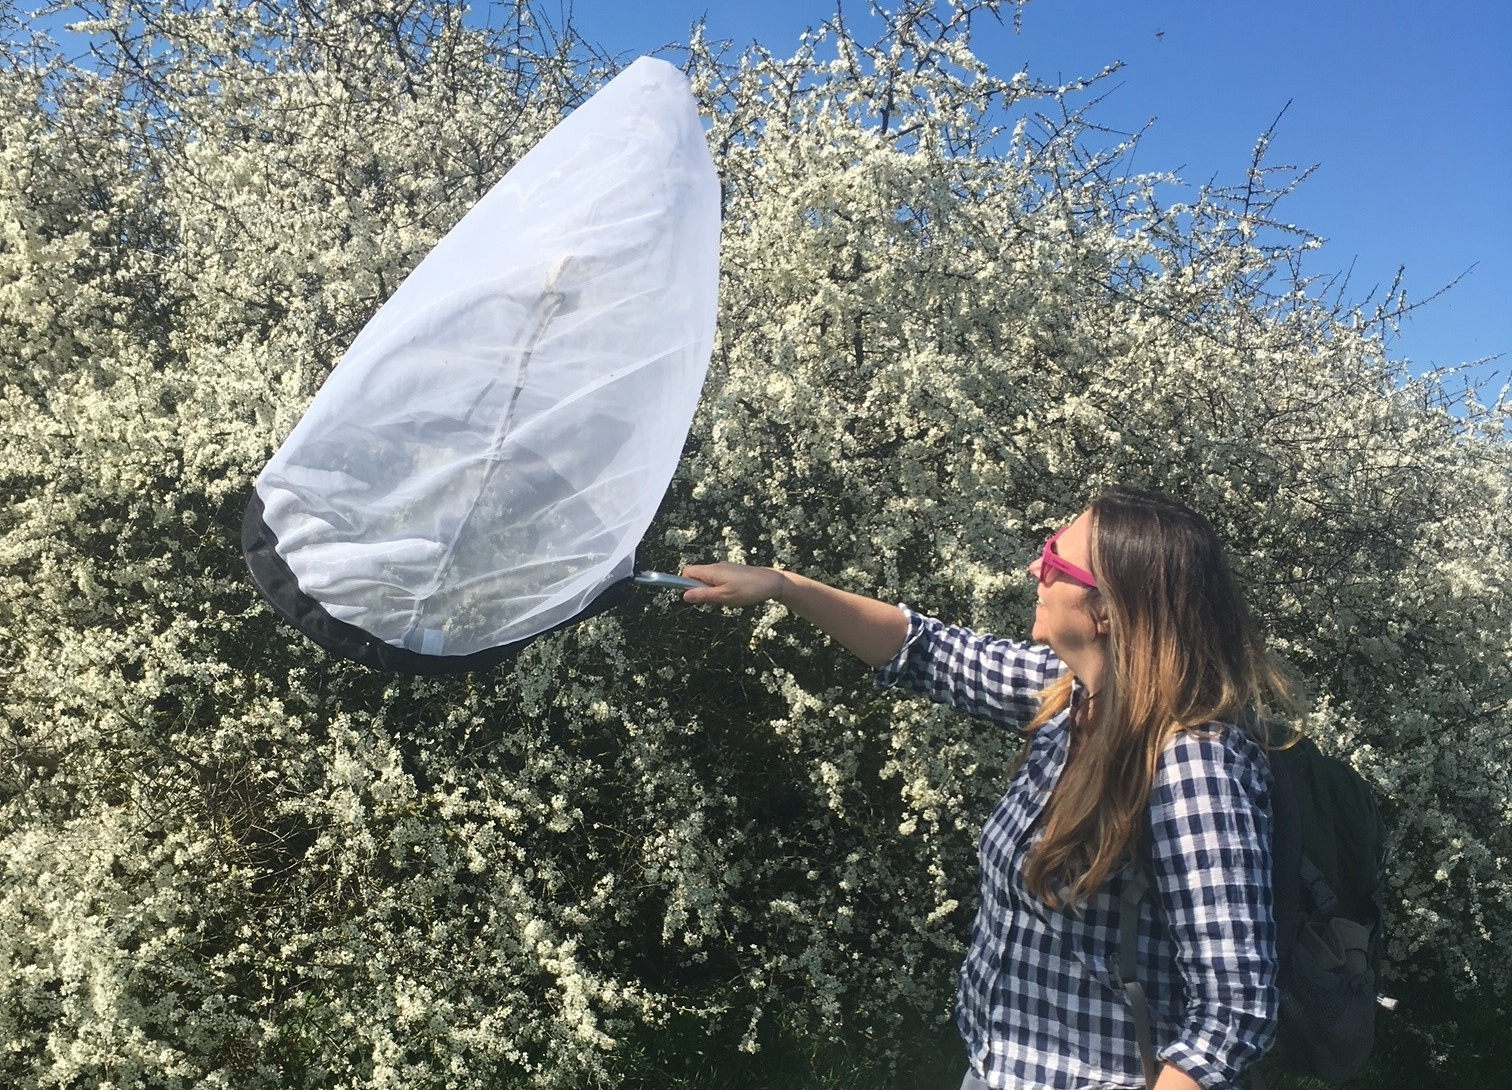 A young woman stands in front of a flowering bush, using a large net to capture insects from the flowers